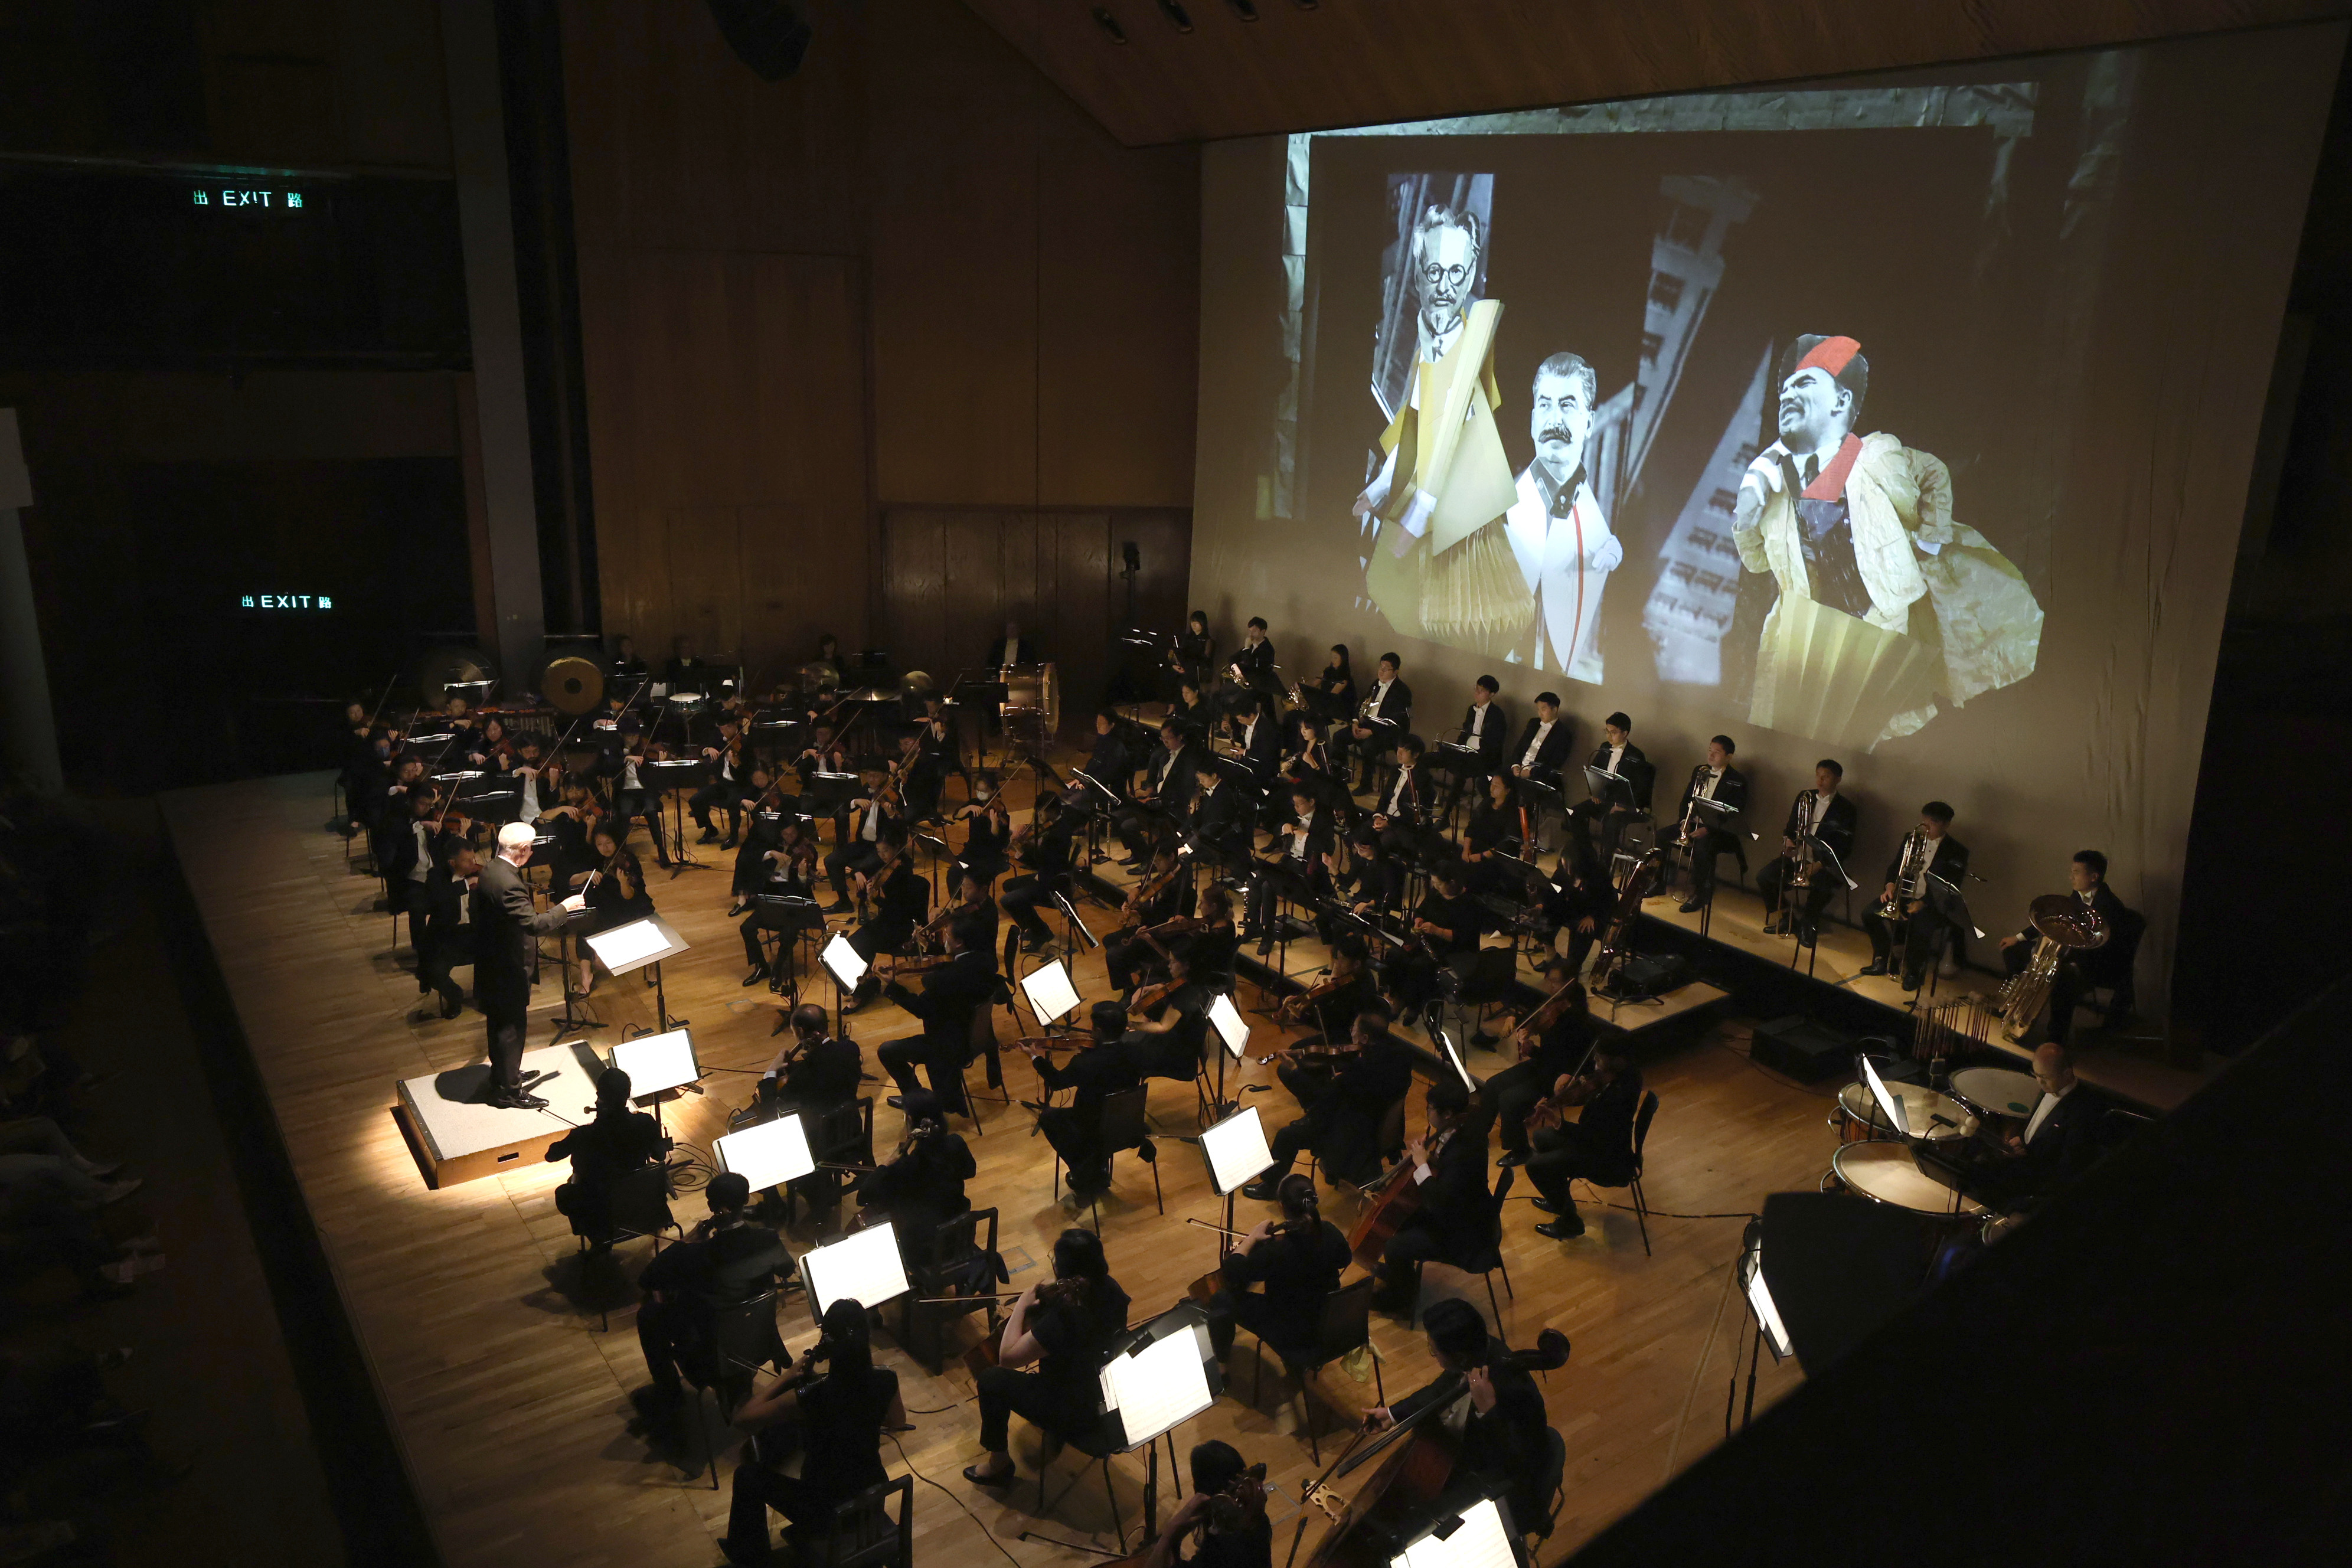 Somewhere between a true concert performance and a live soundtrack, the Hong Kong Sinfonietta’s performance of Shostakovich’s Symphony No 10 with artist William Kentridge’s film inspired by it, “Oh, To Believe In Another World”, was one of nervous intensity. Photo: Hong Kong Sinfonietta